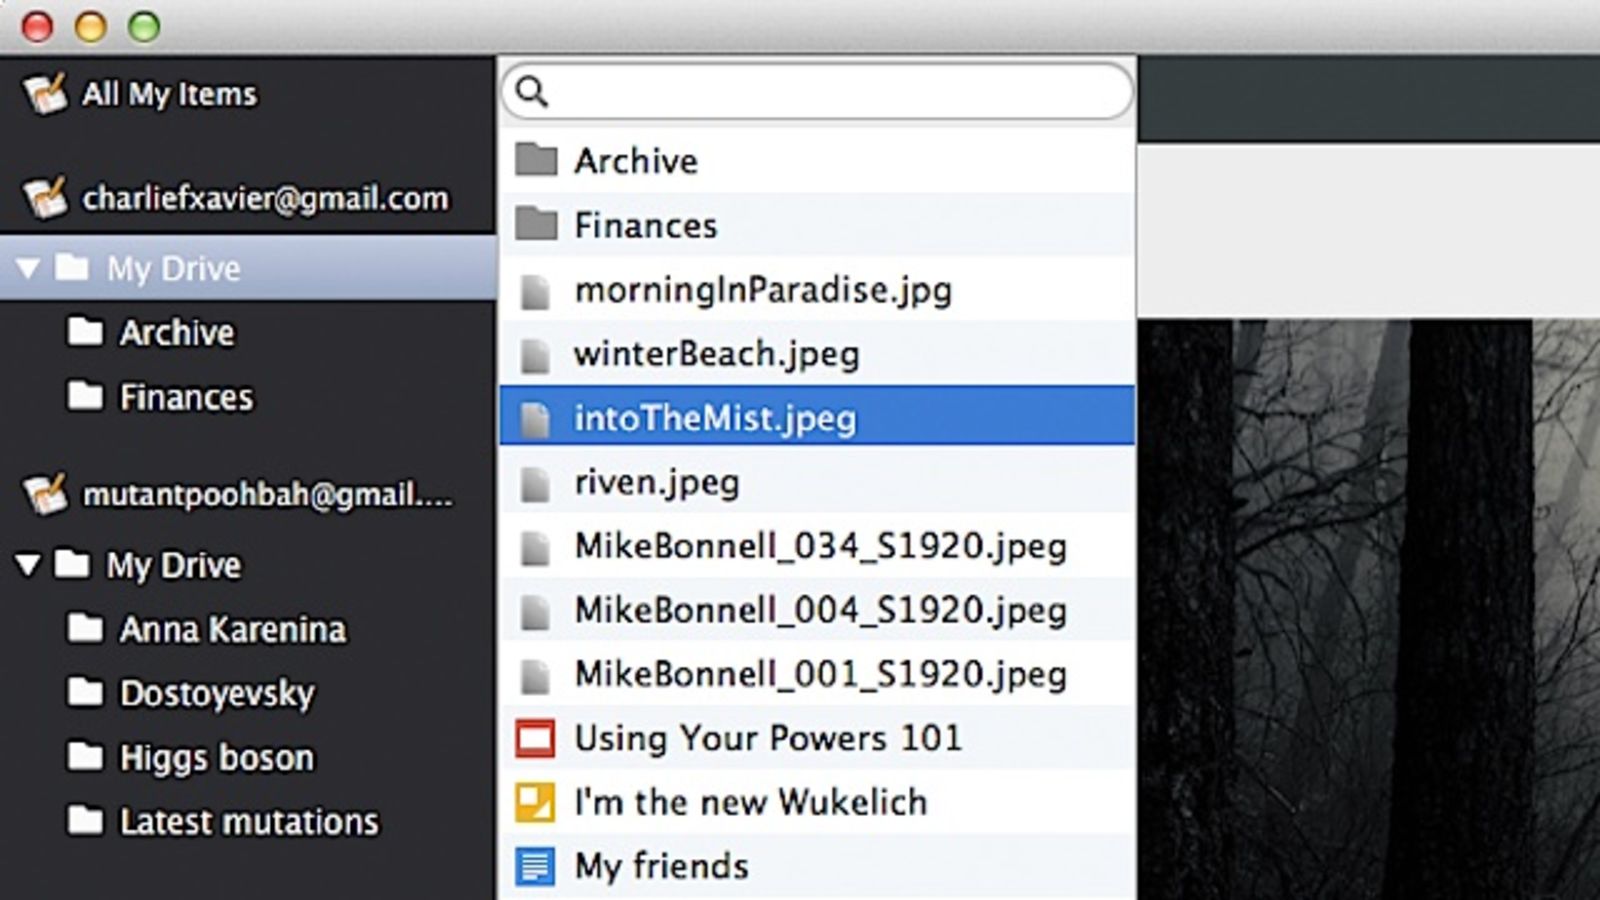 Download Webpages For Offline Viewing Mac